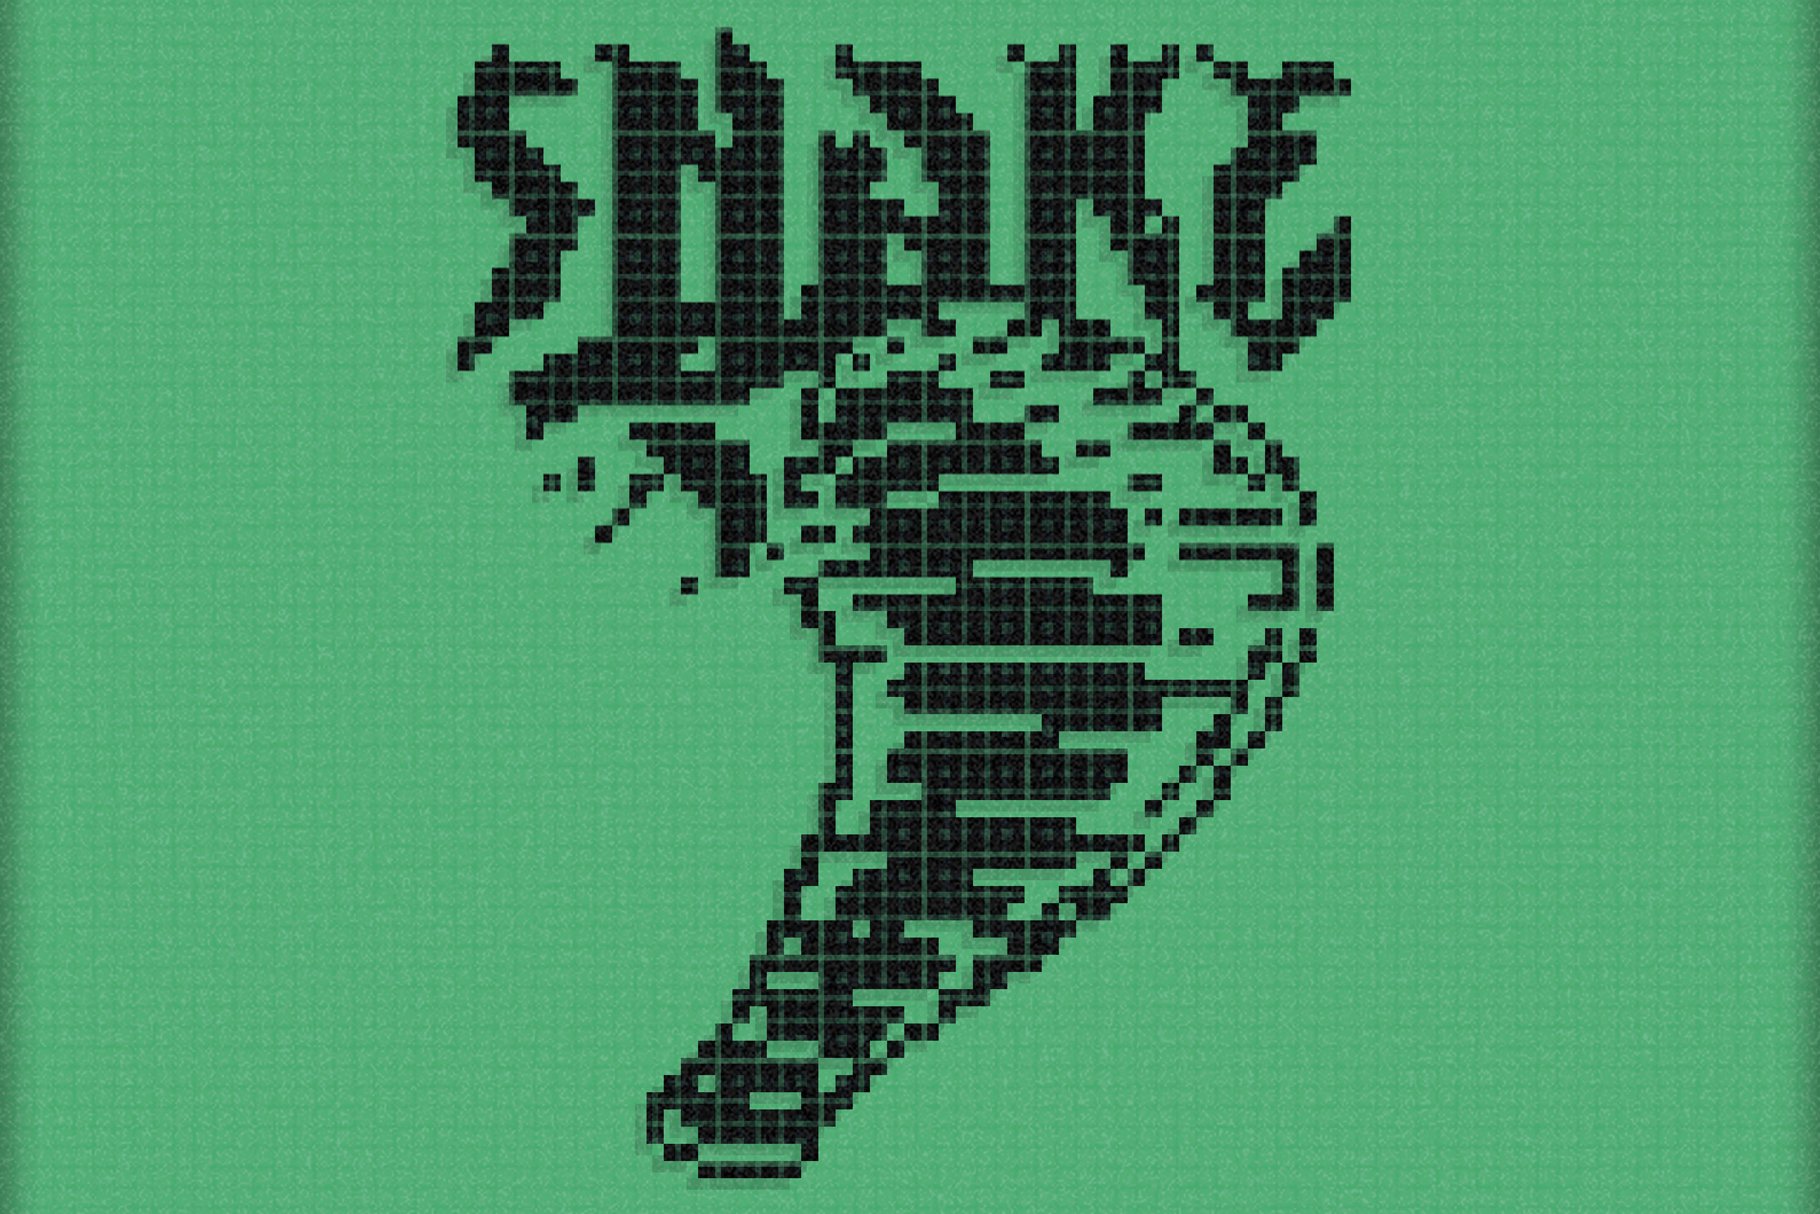 Nokia Snake Game Design designs, themes, templates and